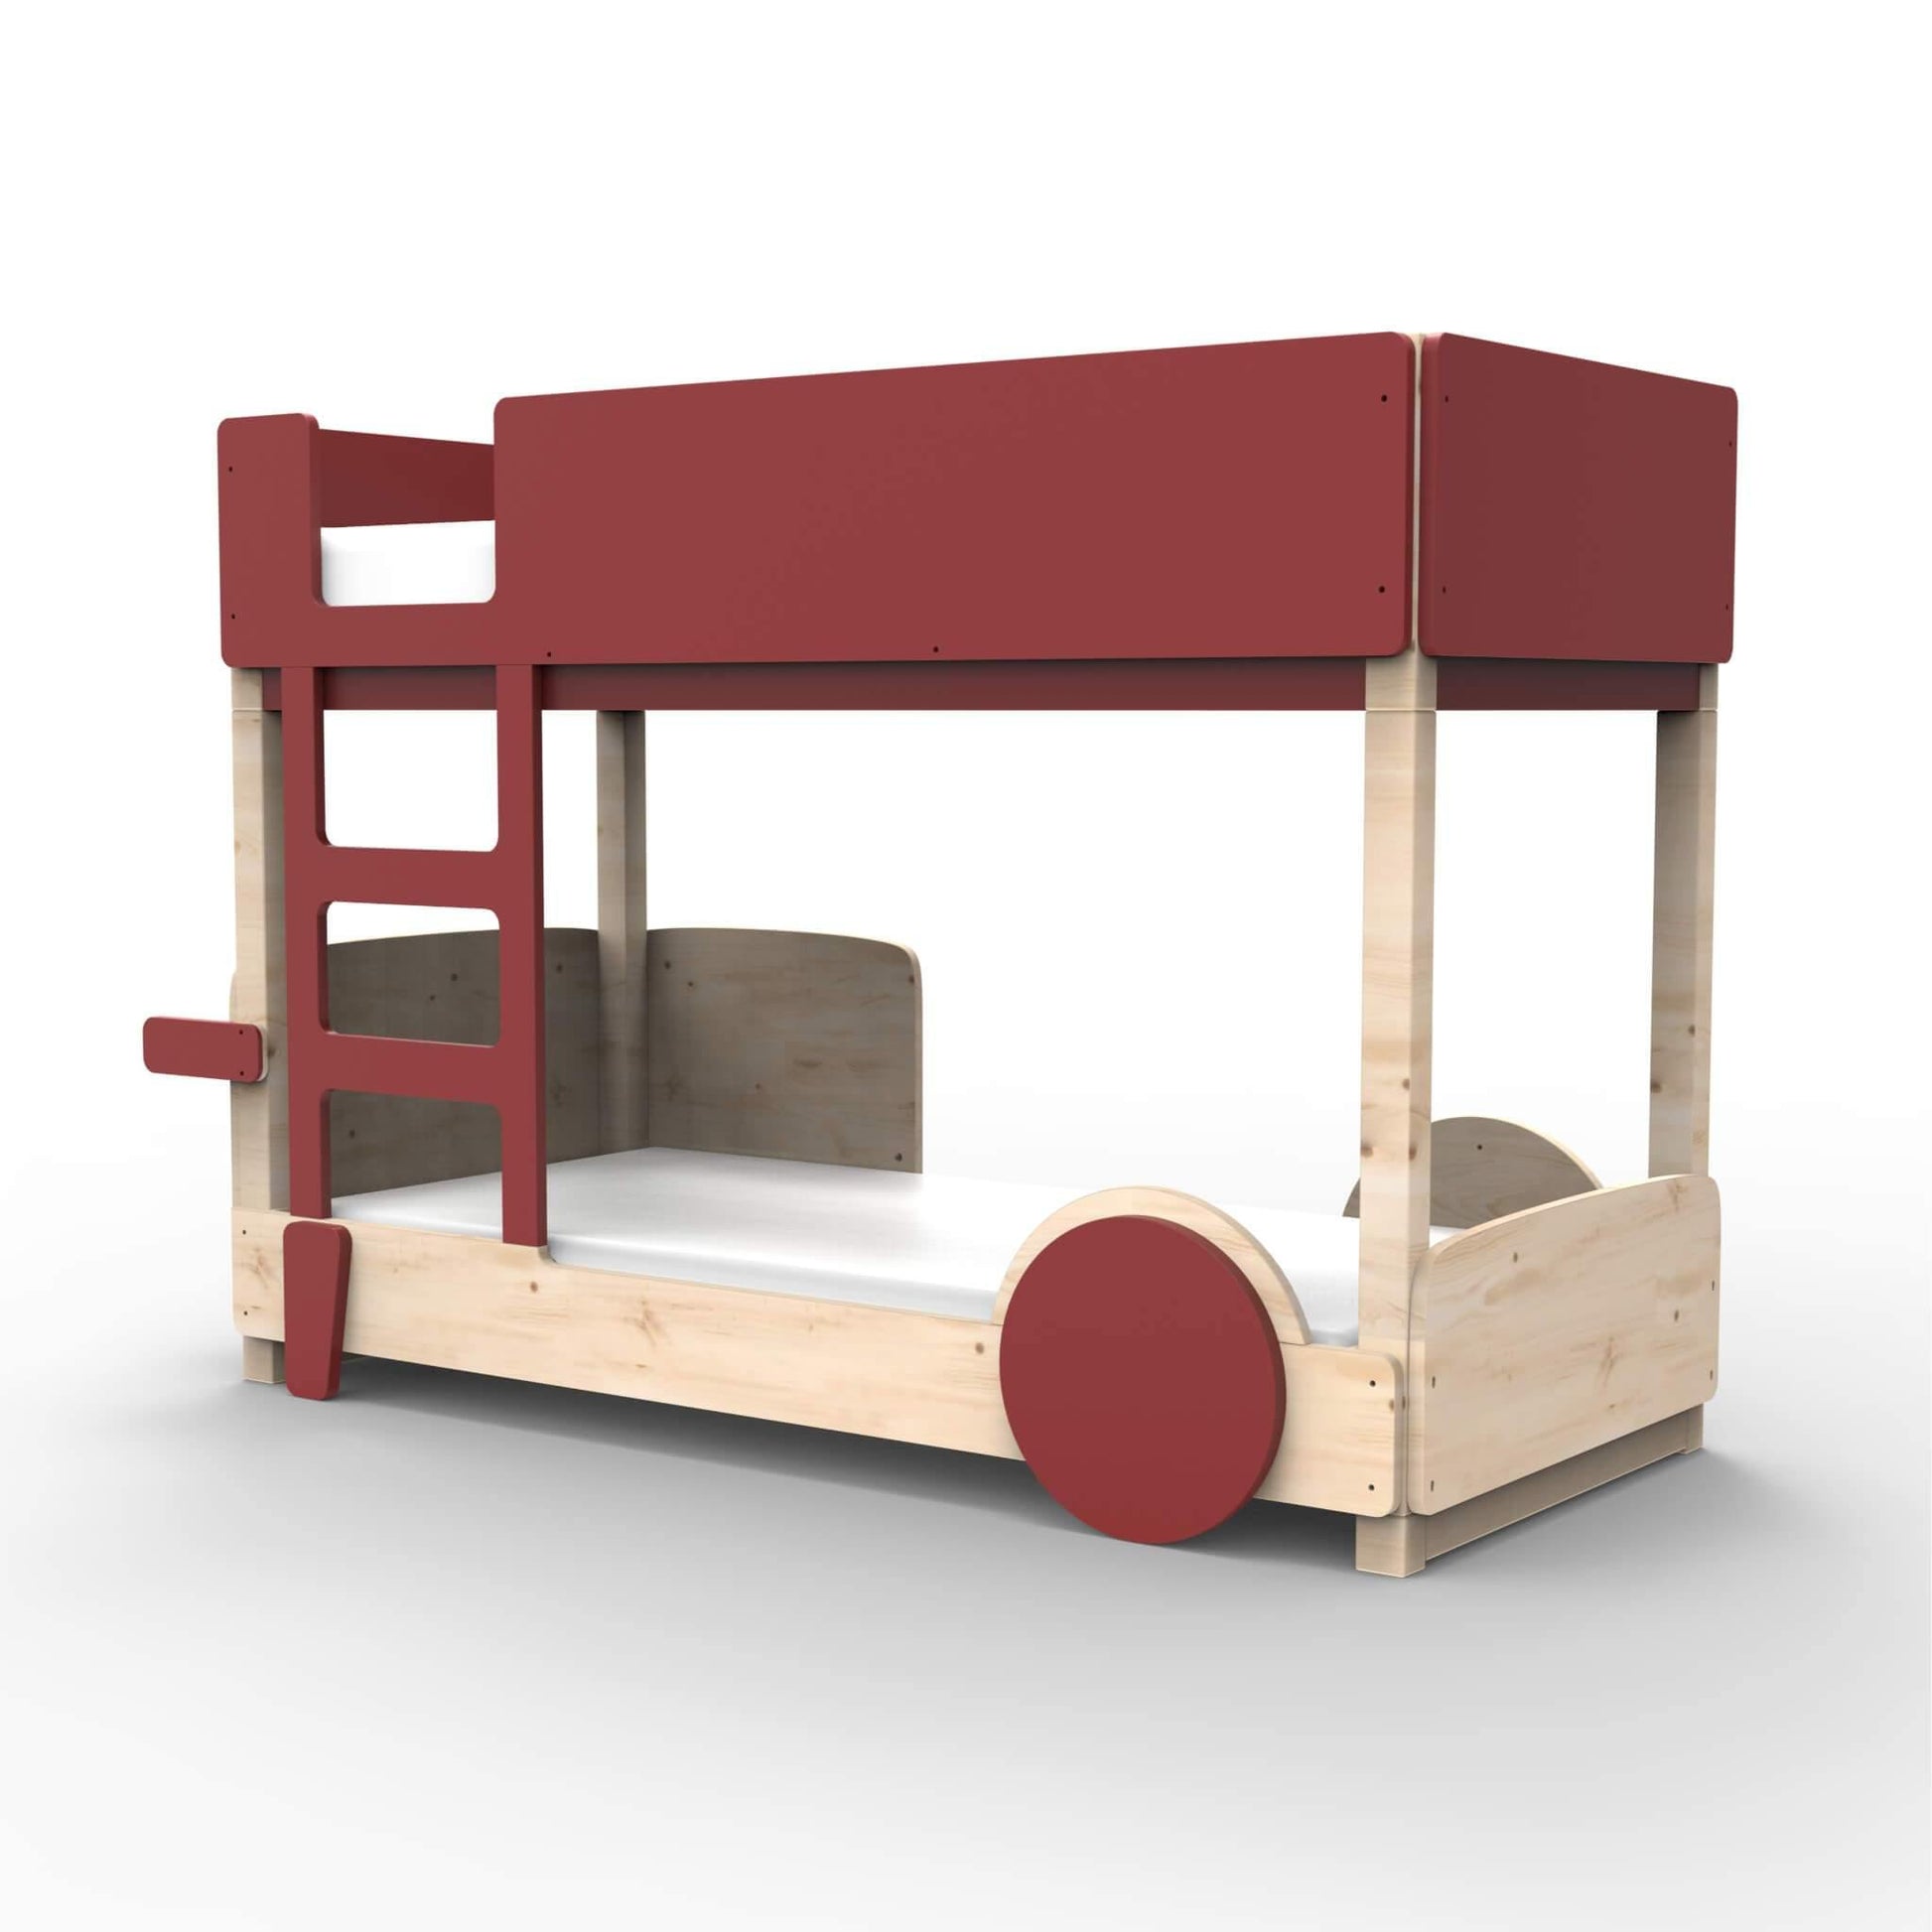 Discovery bunk bed